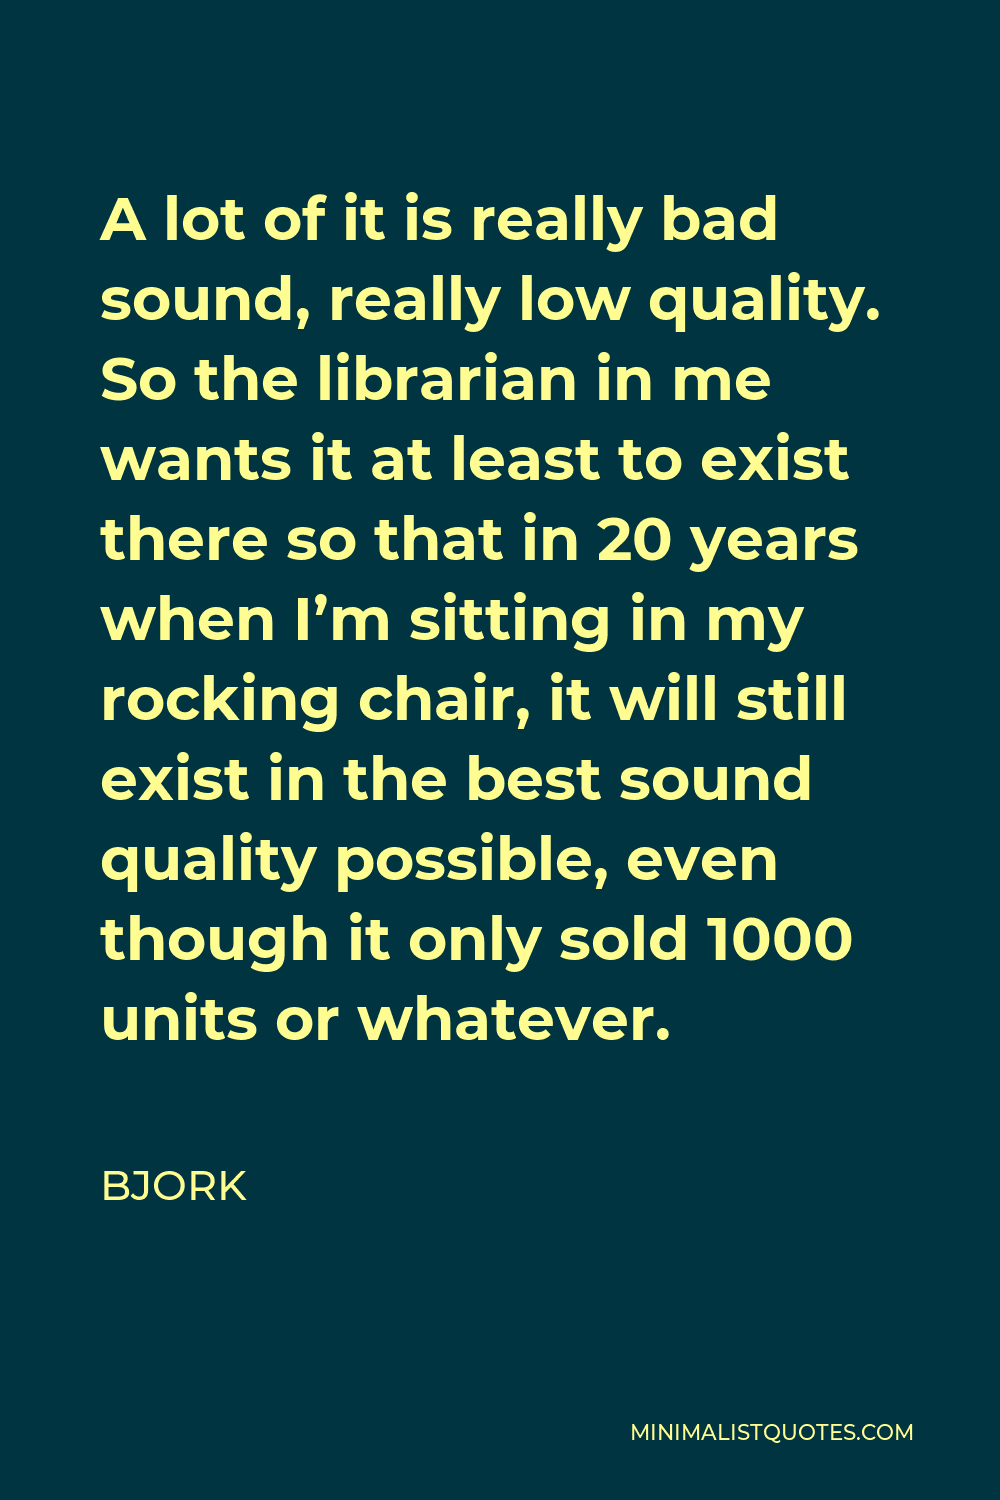 Bjork Quote - A lot of it is really bad sound, really low quality. So the librarian in me wants it at least to exist there so that in 20 years when I’m sitting in my rocking chair, it will still exist in the best sound quality possible, even though it only sold 1000 units or whatever.